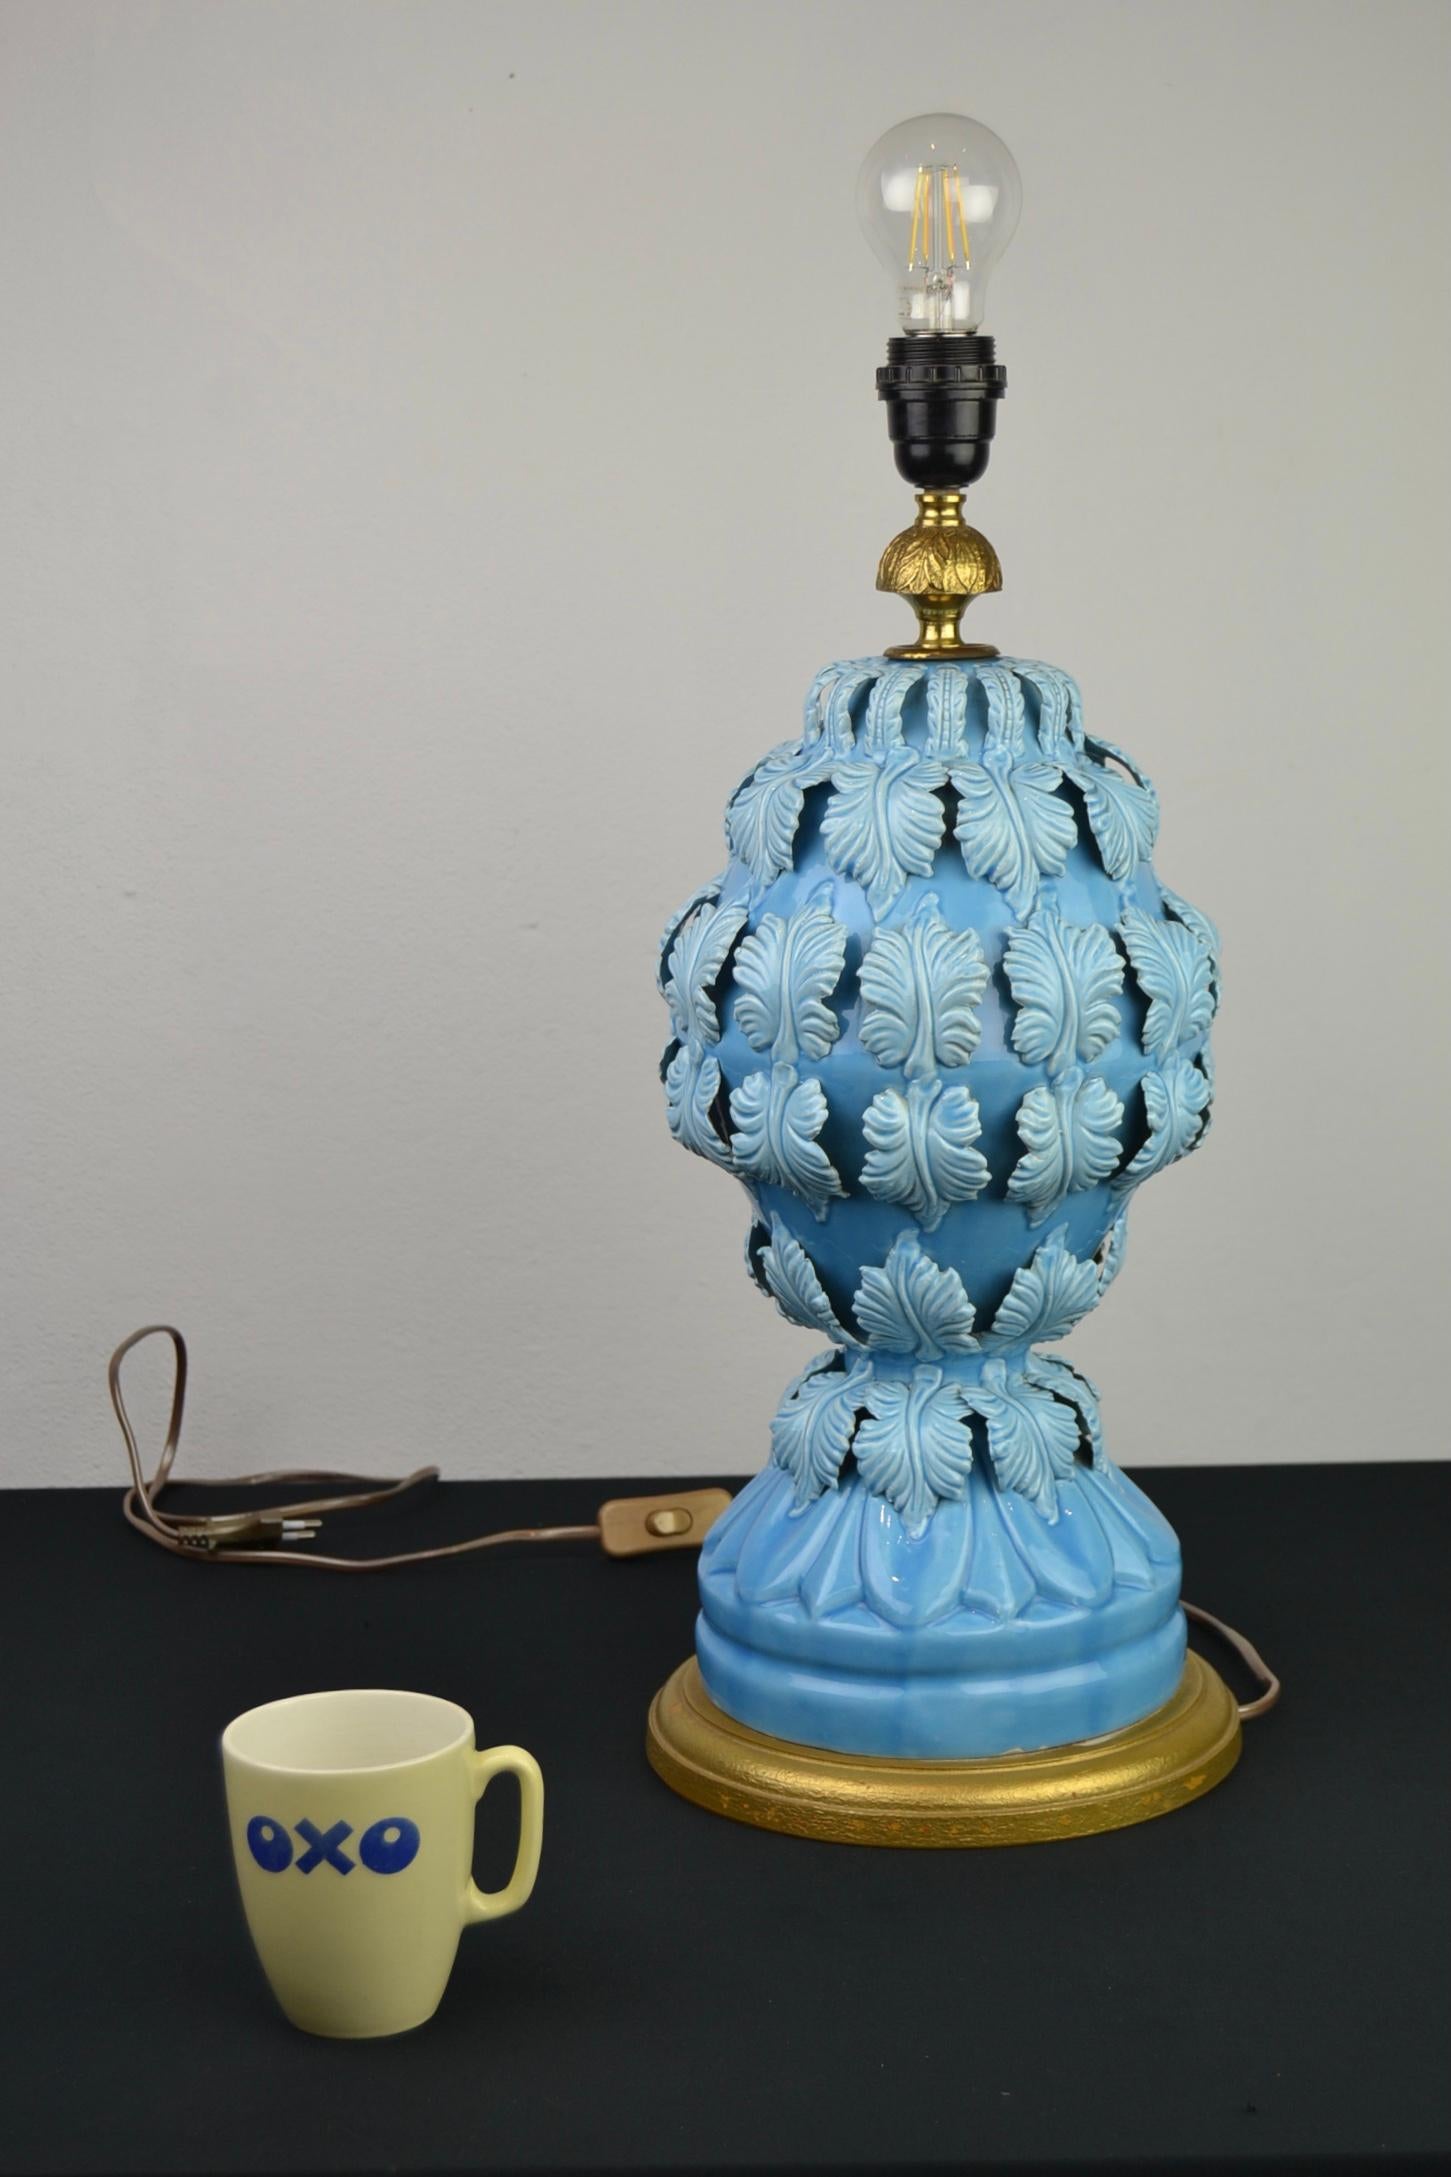 20th Century Blue Ceramic Manises Spain Table Lamp with Leaves, 1960s